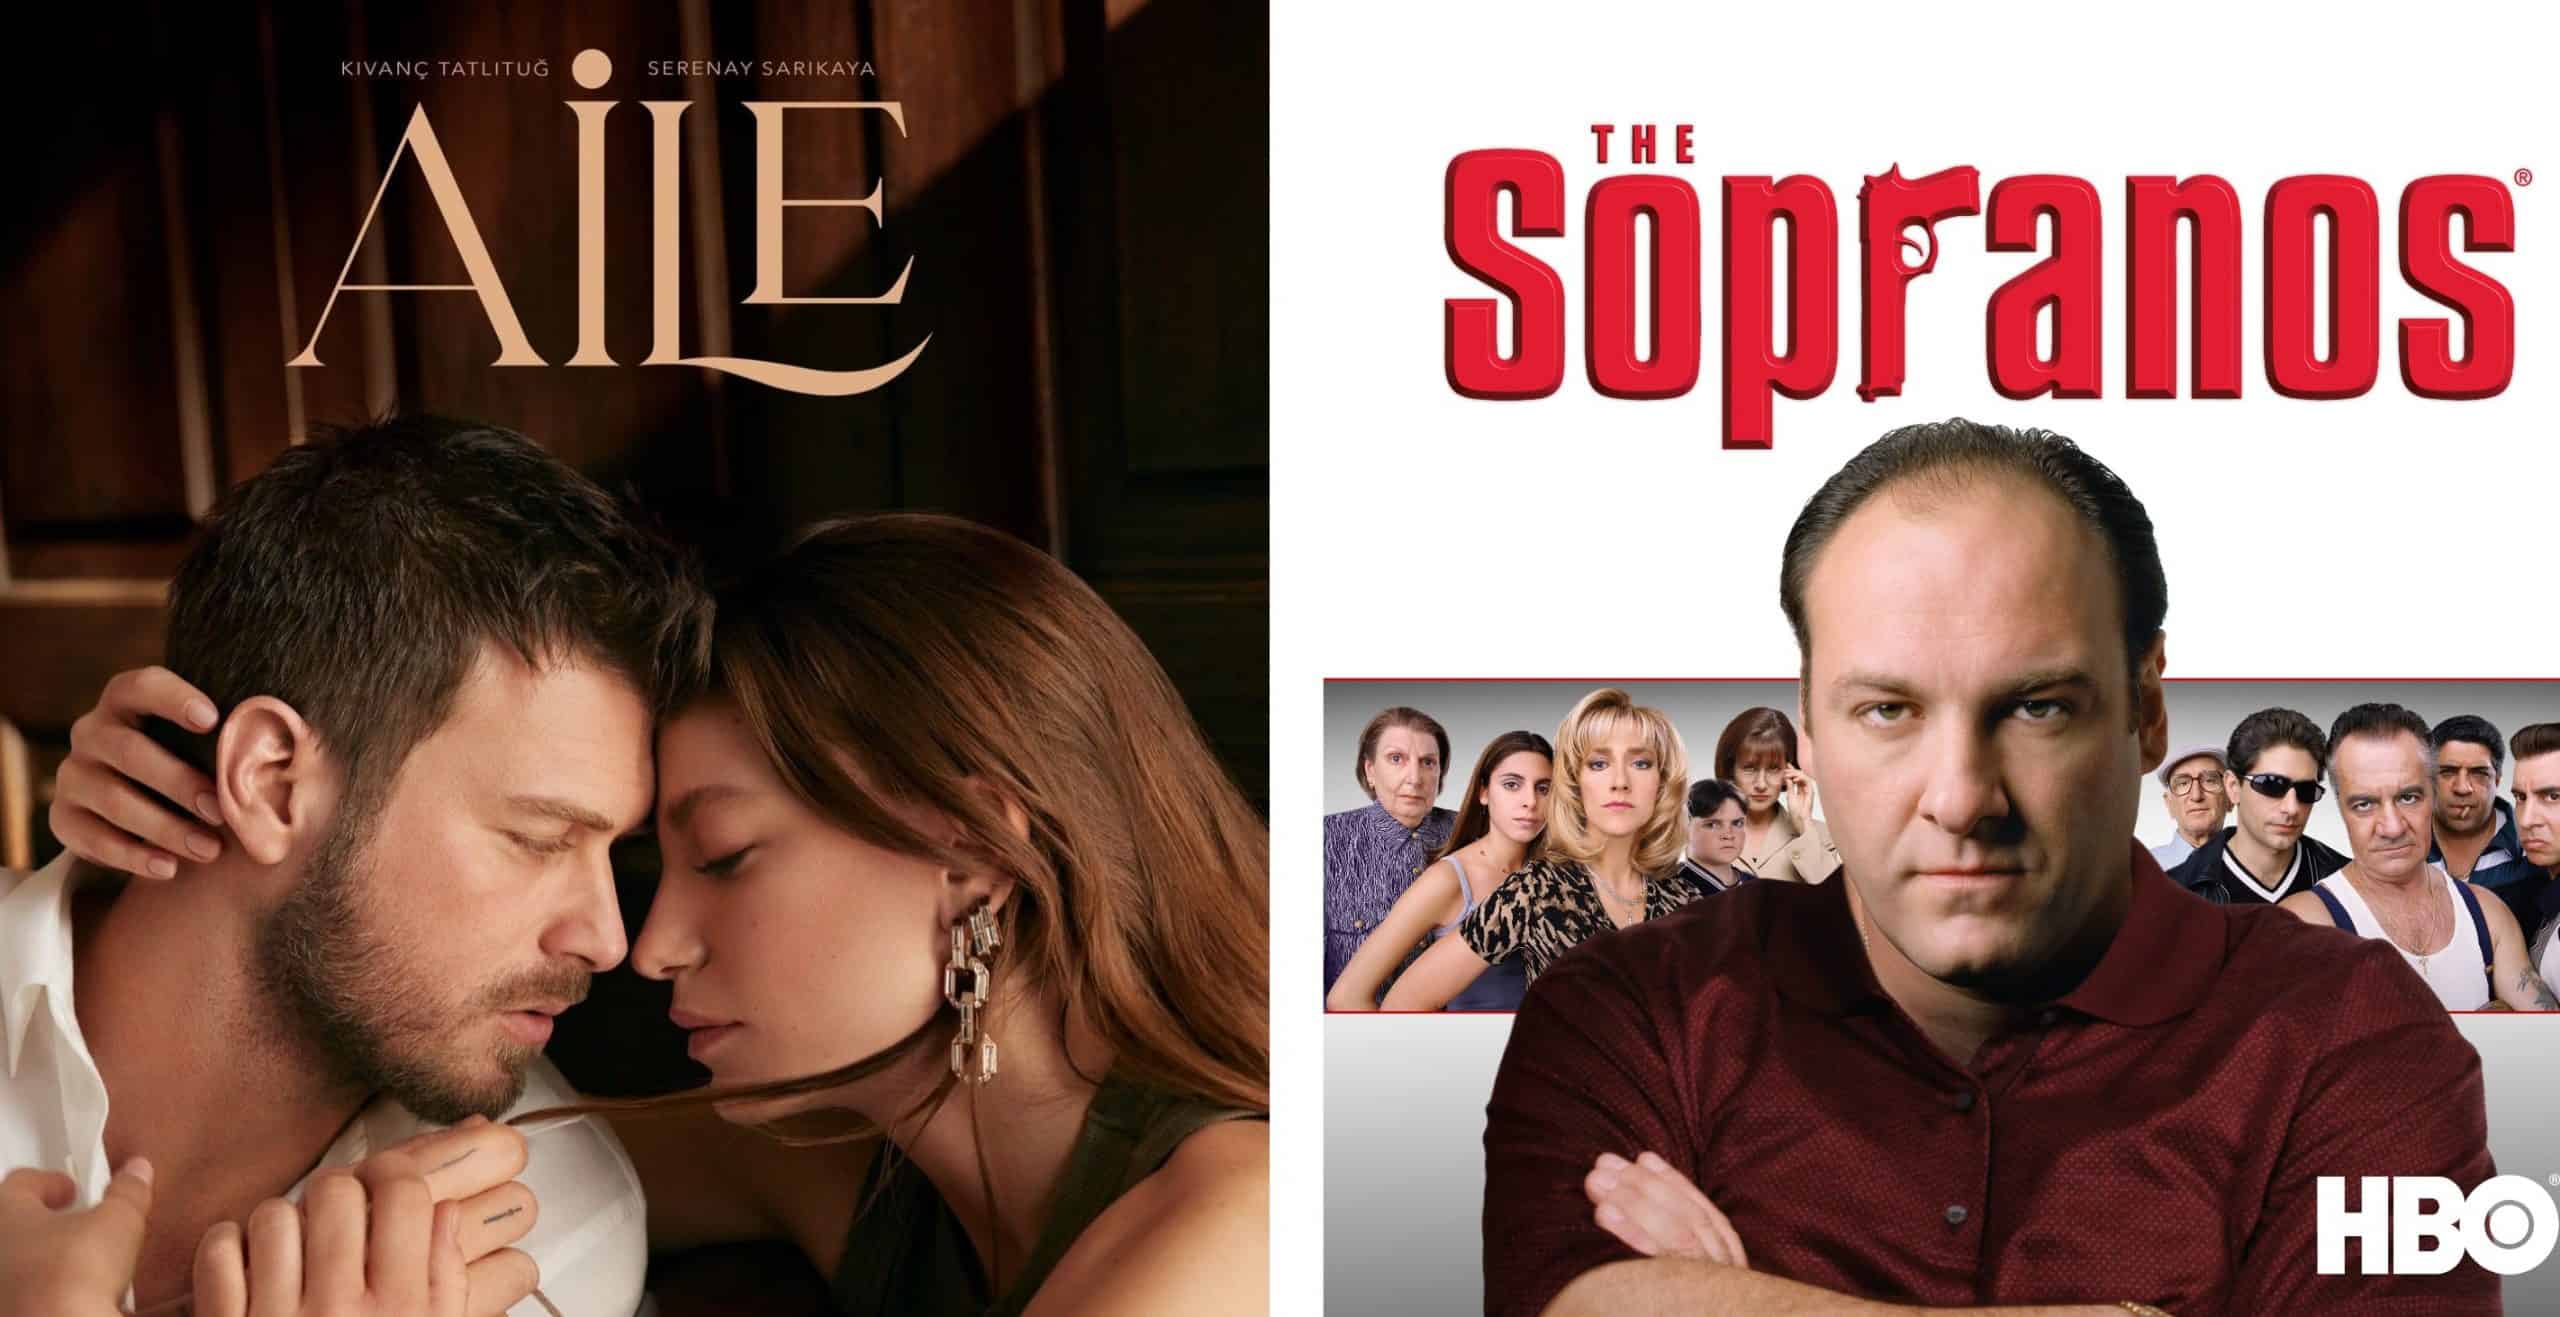 Aile and The Sopranos